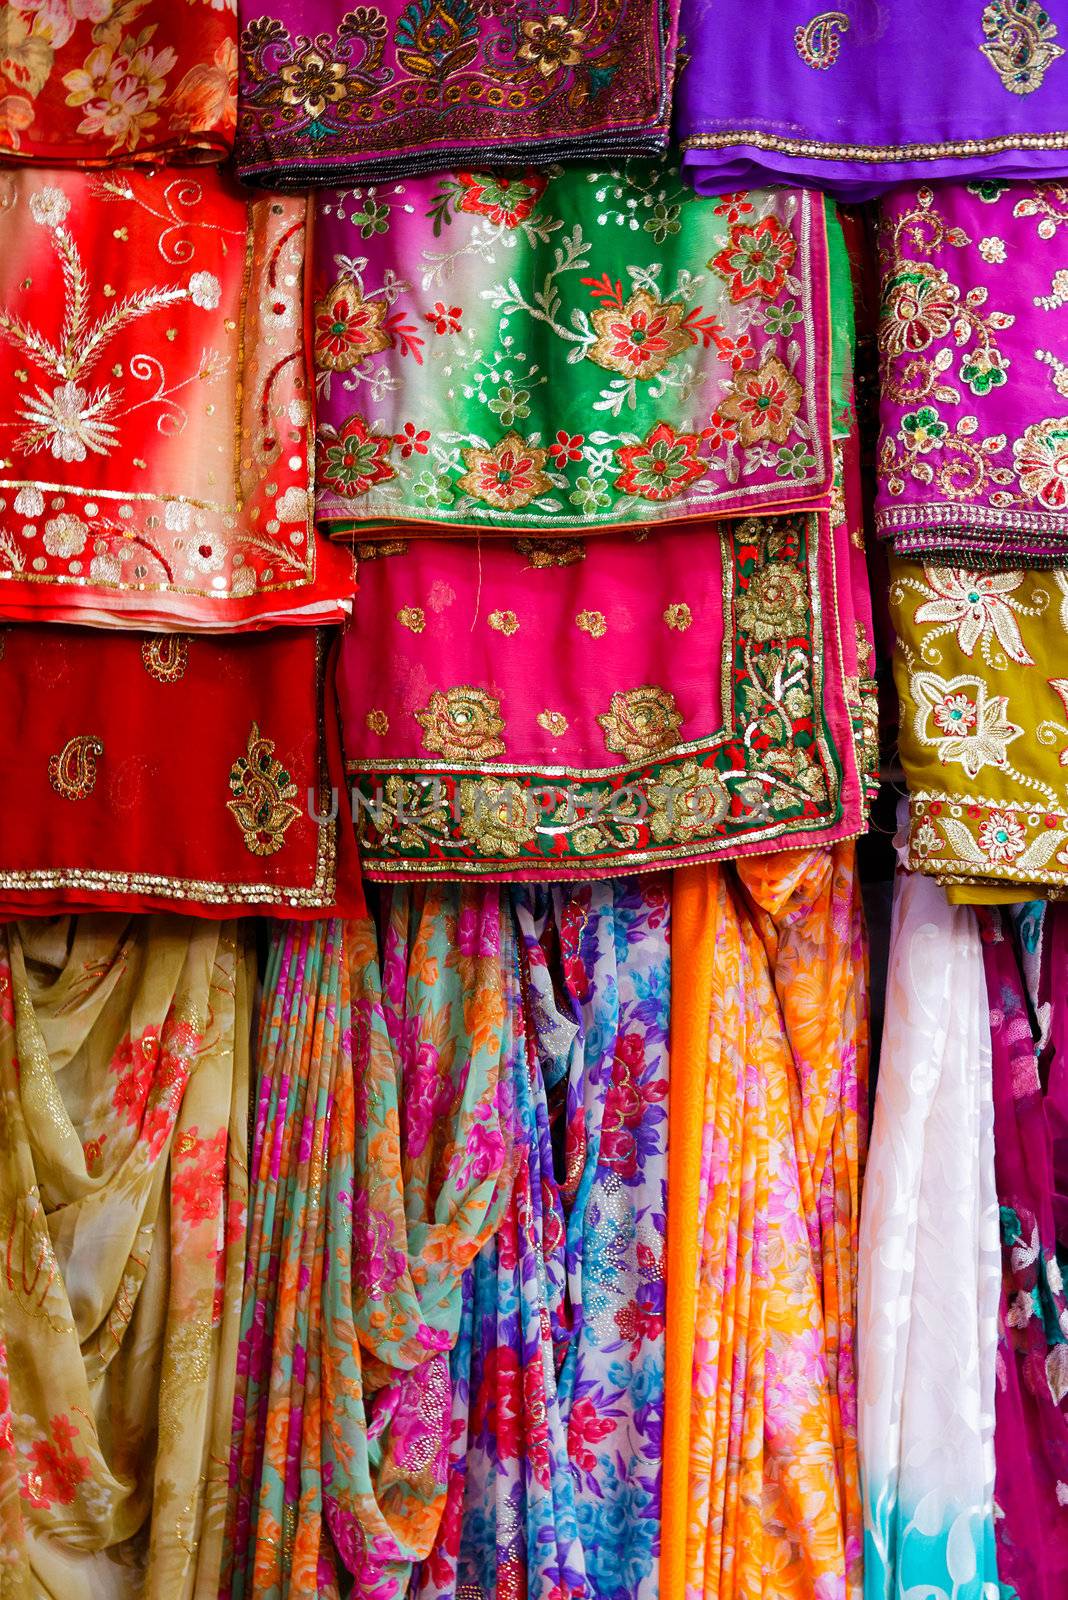 Colorful clothes and saris by dutourdumonde